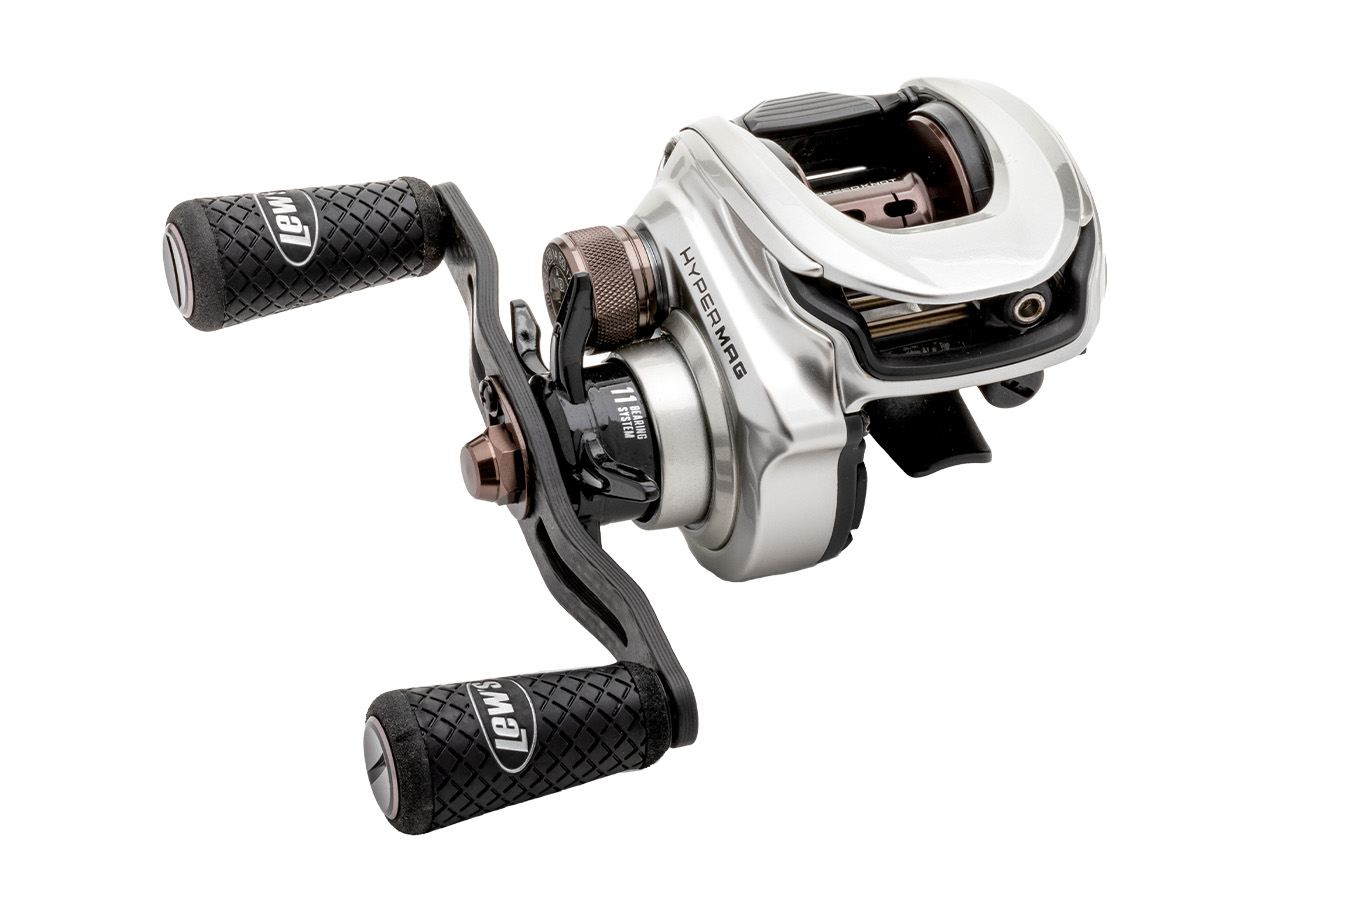 Discount Lew`s Team Lew's Hypermag 7.5:1 Right Hand Baitcast Reel for Sale, Online Fishing Reels Store